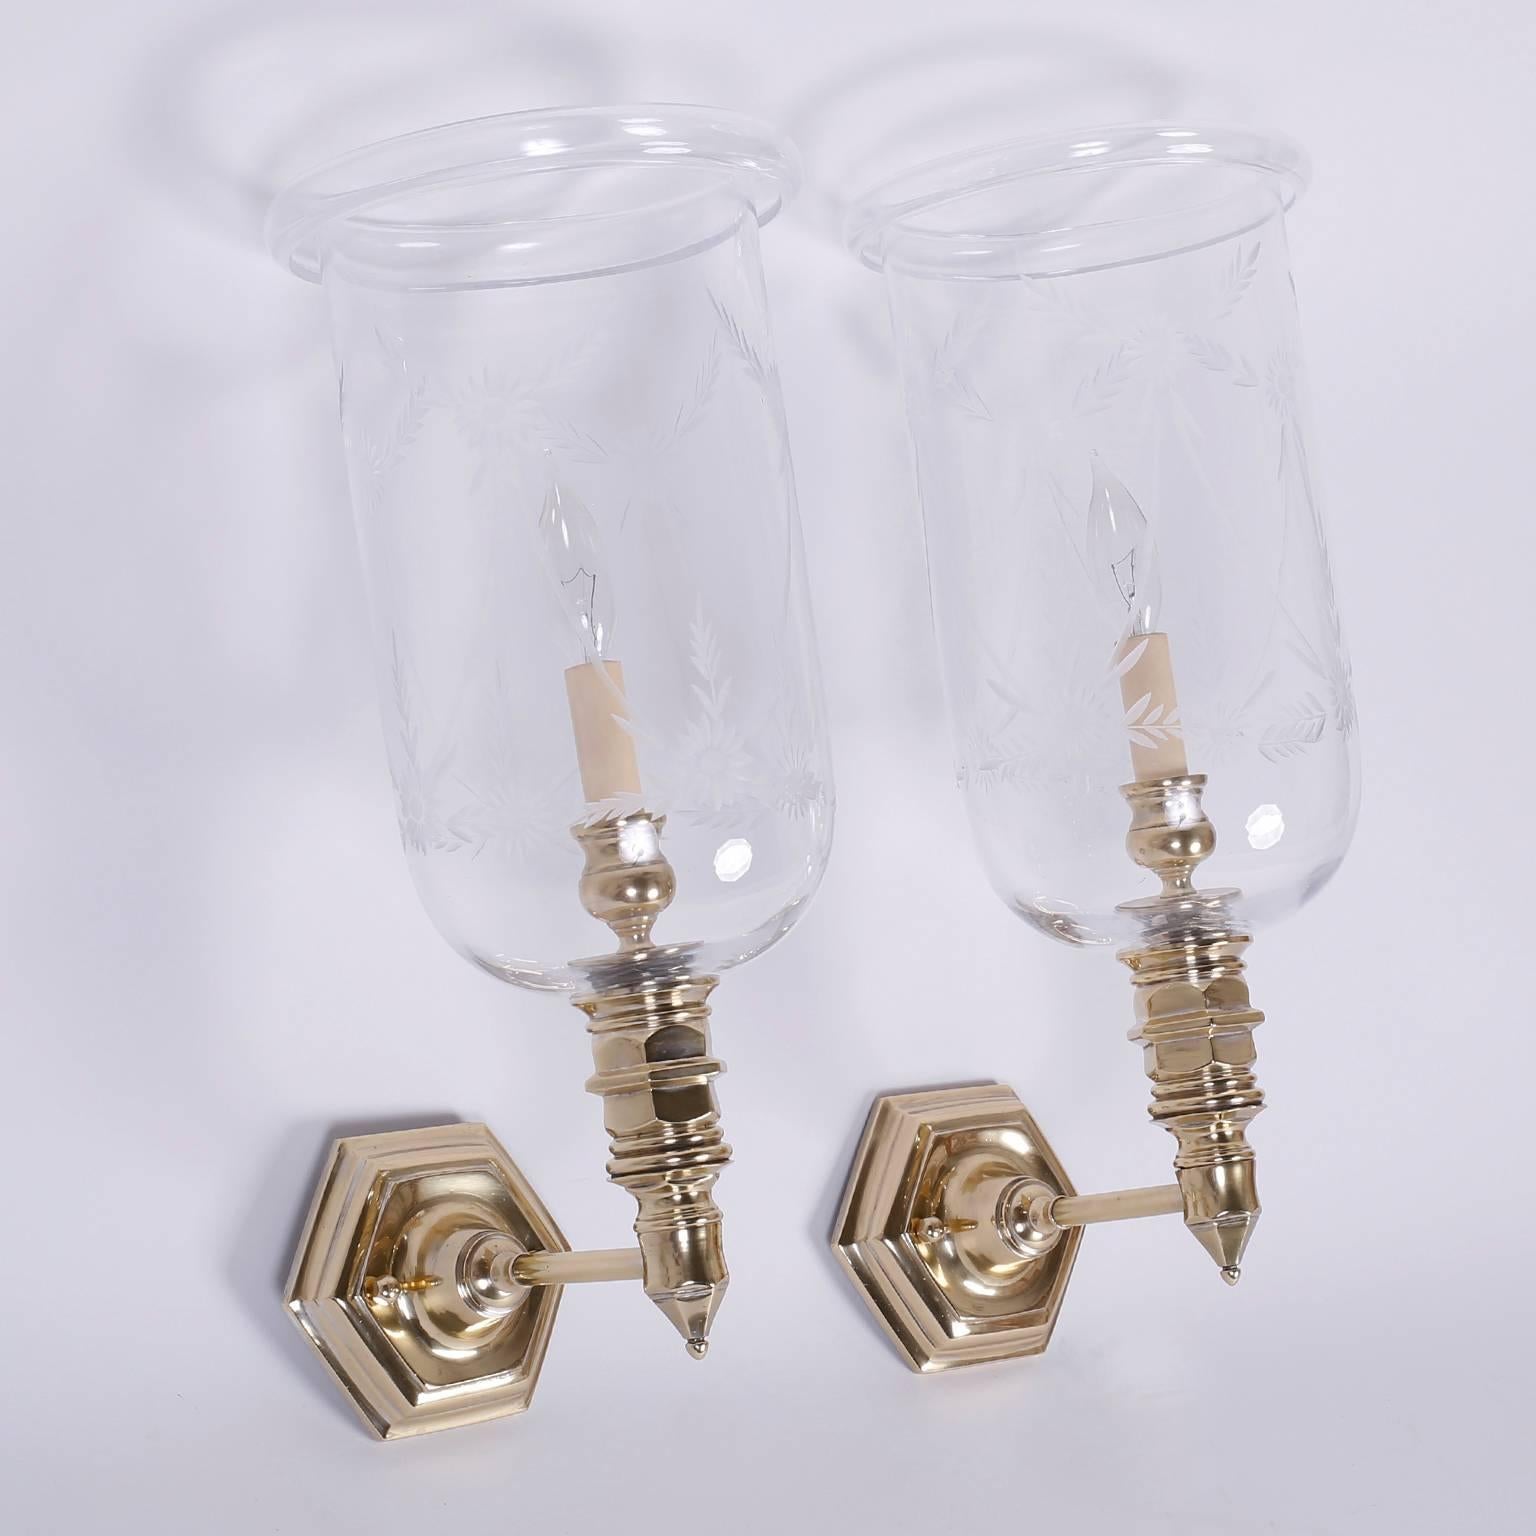 Pair of sconces with handblown glass hurricane shades etched with floral designs. The hand polished and lacquered back plates and arms have influences from Queen Anne to the Victorians.